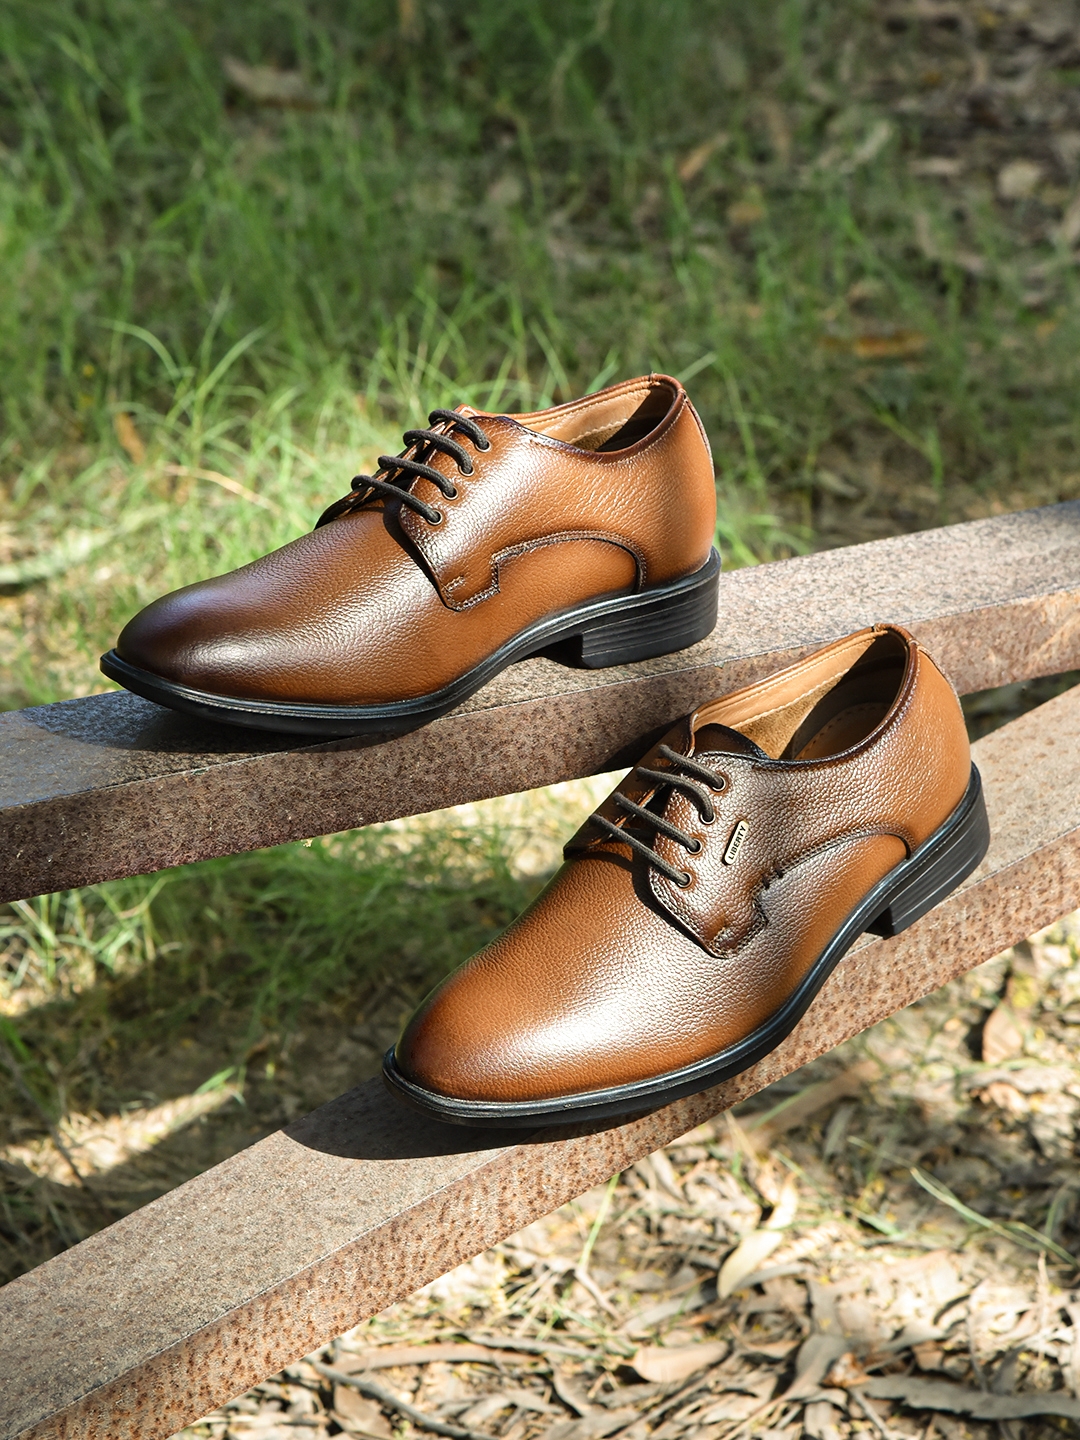 Fortune by Liberty LOM-605 Tan Formal Shoes for Men